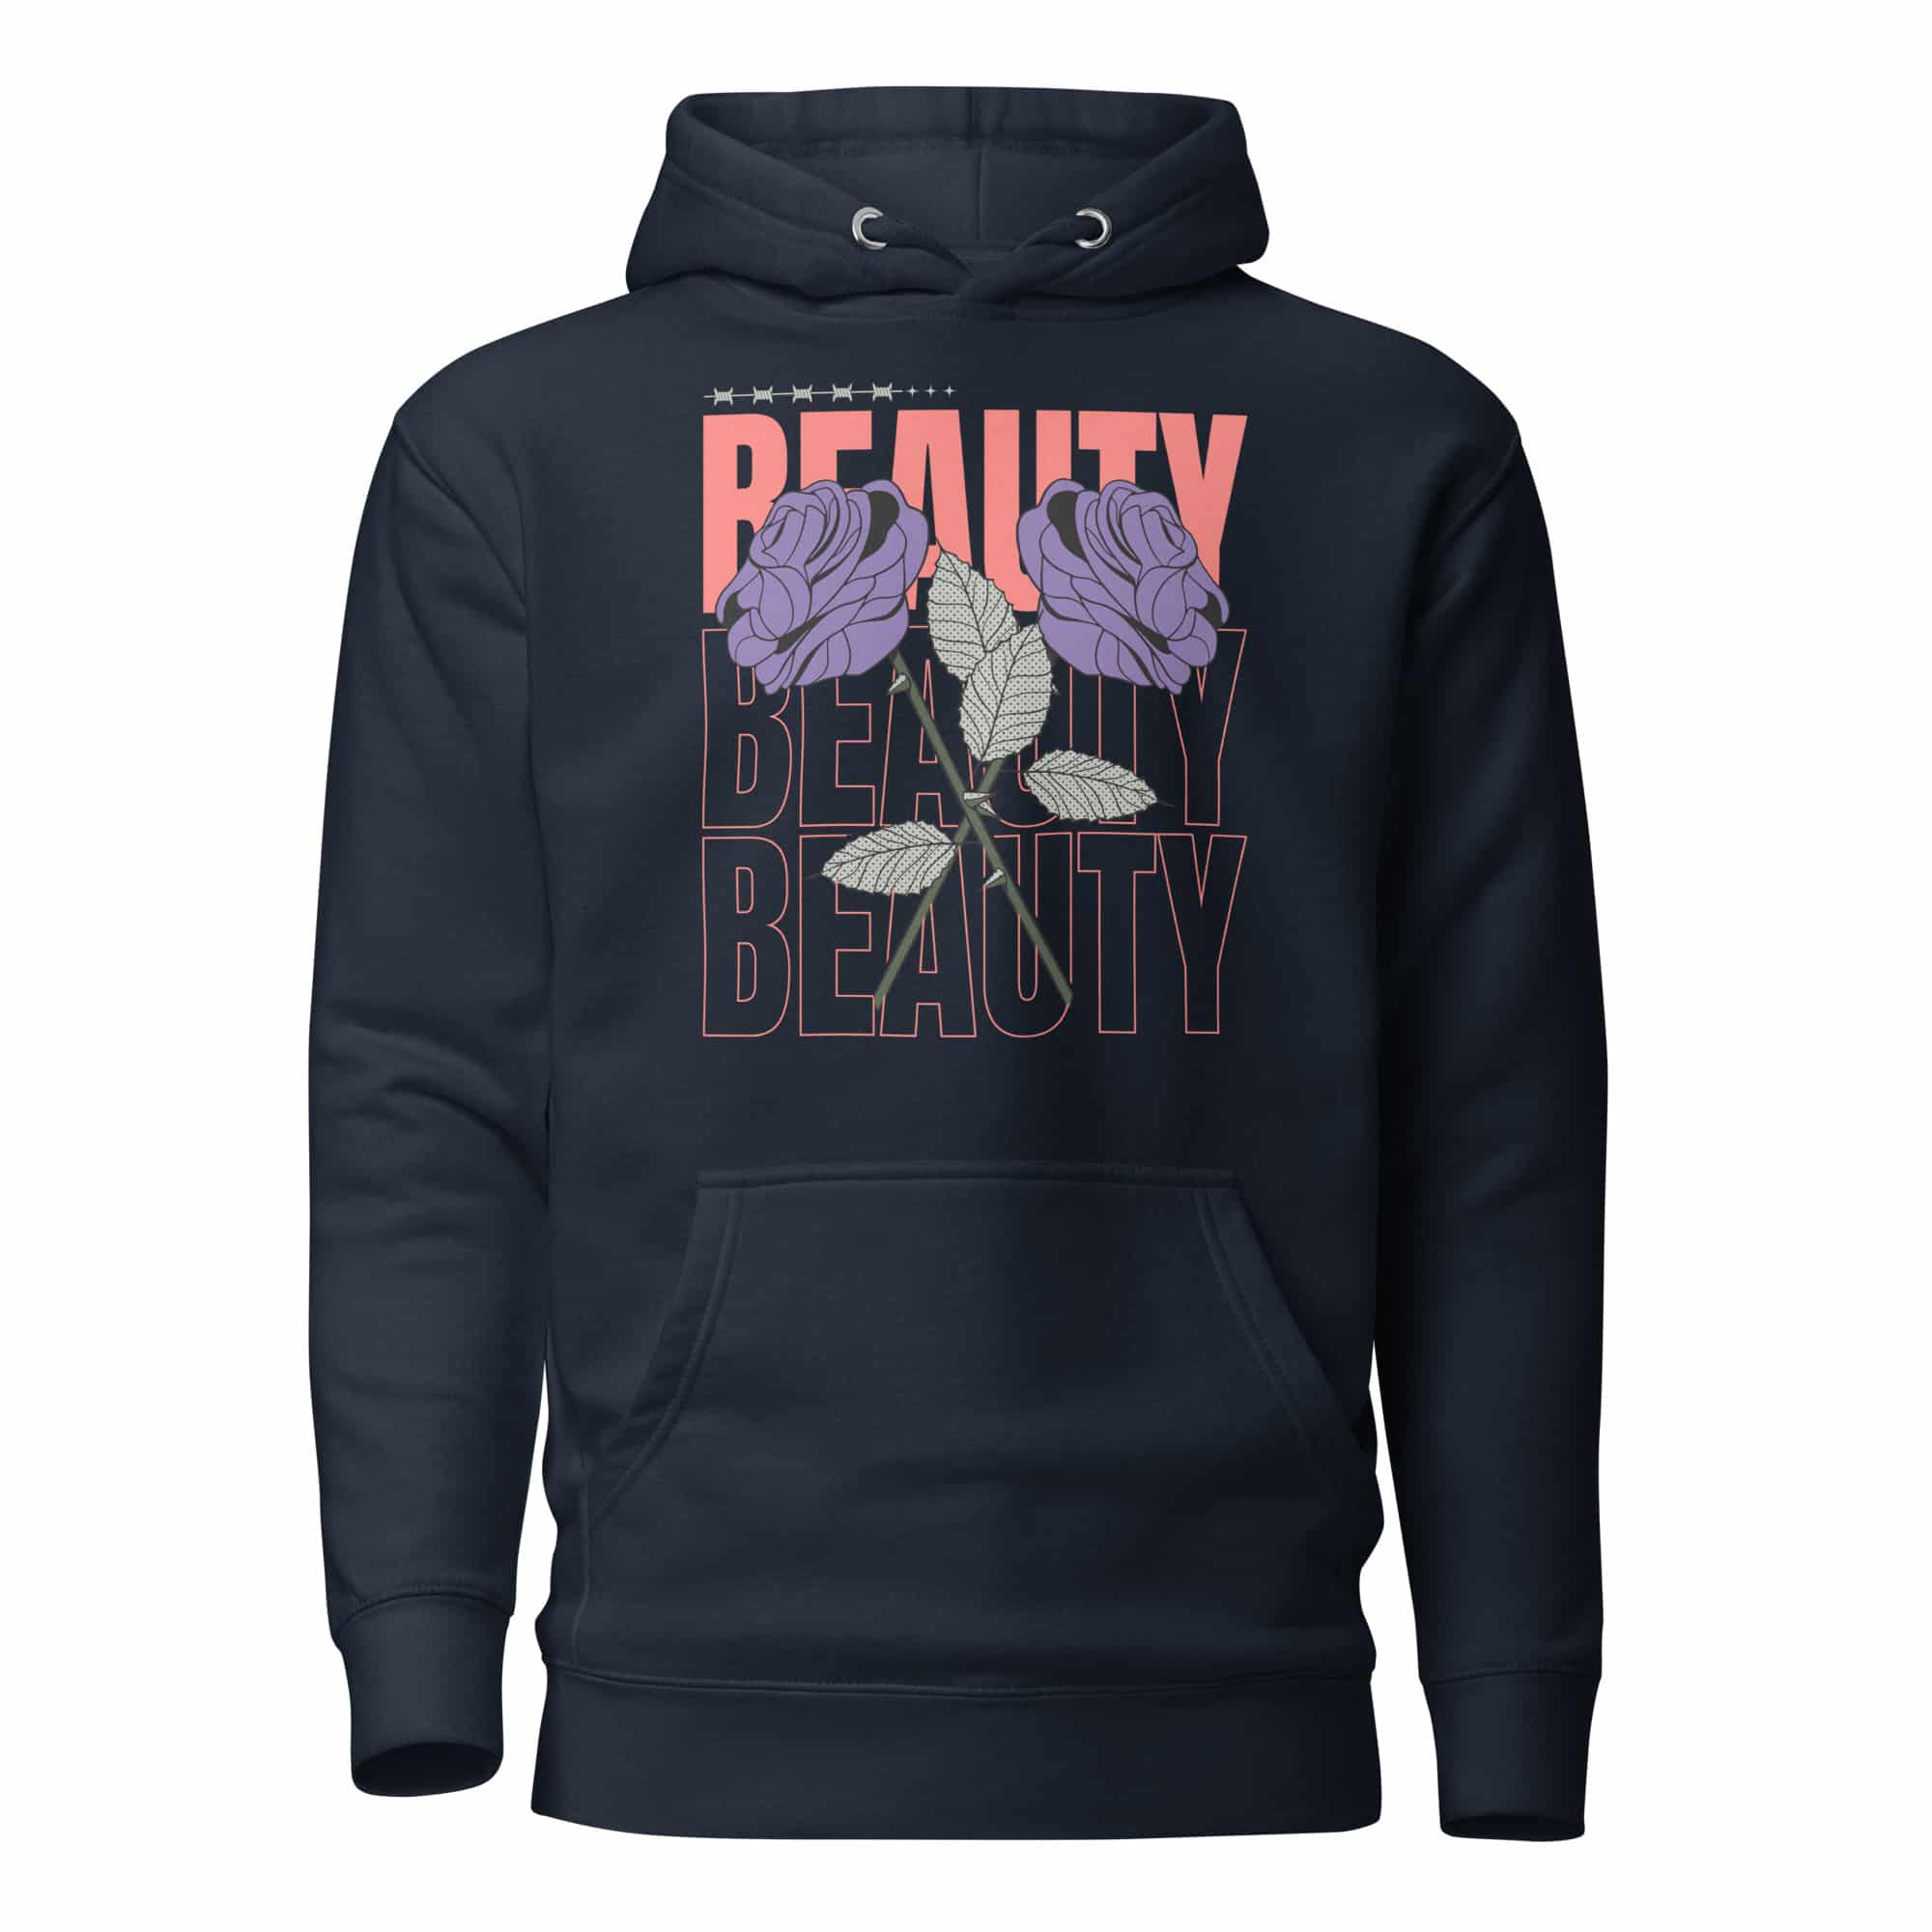 Beauty Of Gaming Hoodie Video game store Gaming merchandise Gaming accessories shop Online gaming store Video game shop near me Gaming console store PC gaming store Gaming gear shop Retro gaming shop Board game shop Anime merchandise Anime store online Japanese anime shop Anime figurines Manga shop Anime DVDs Anime accessories Anime apparel Anime collectibles Anime gifts